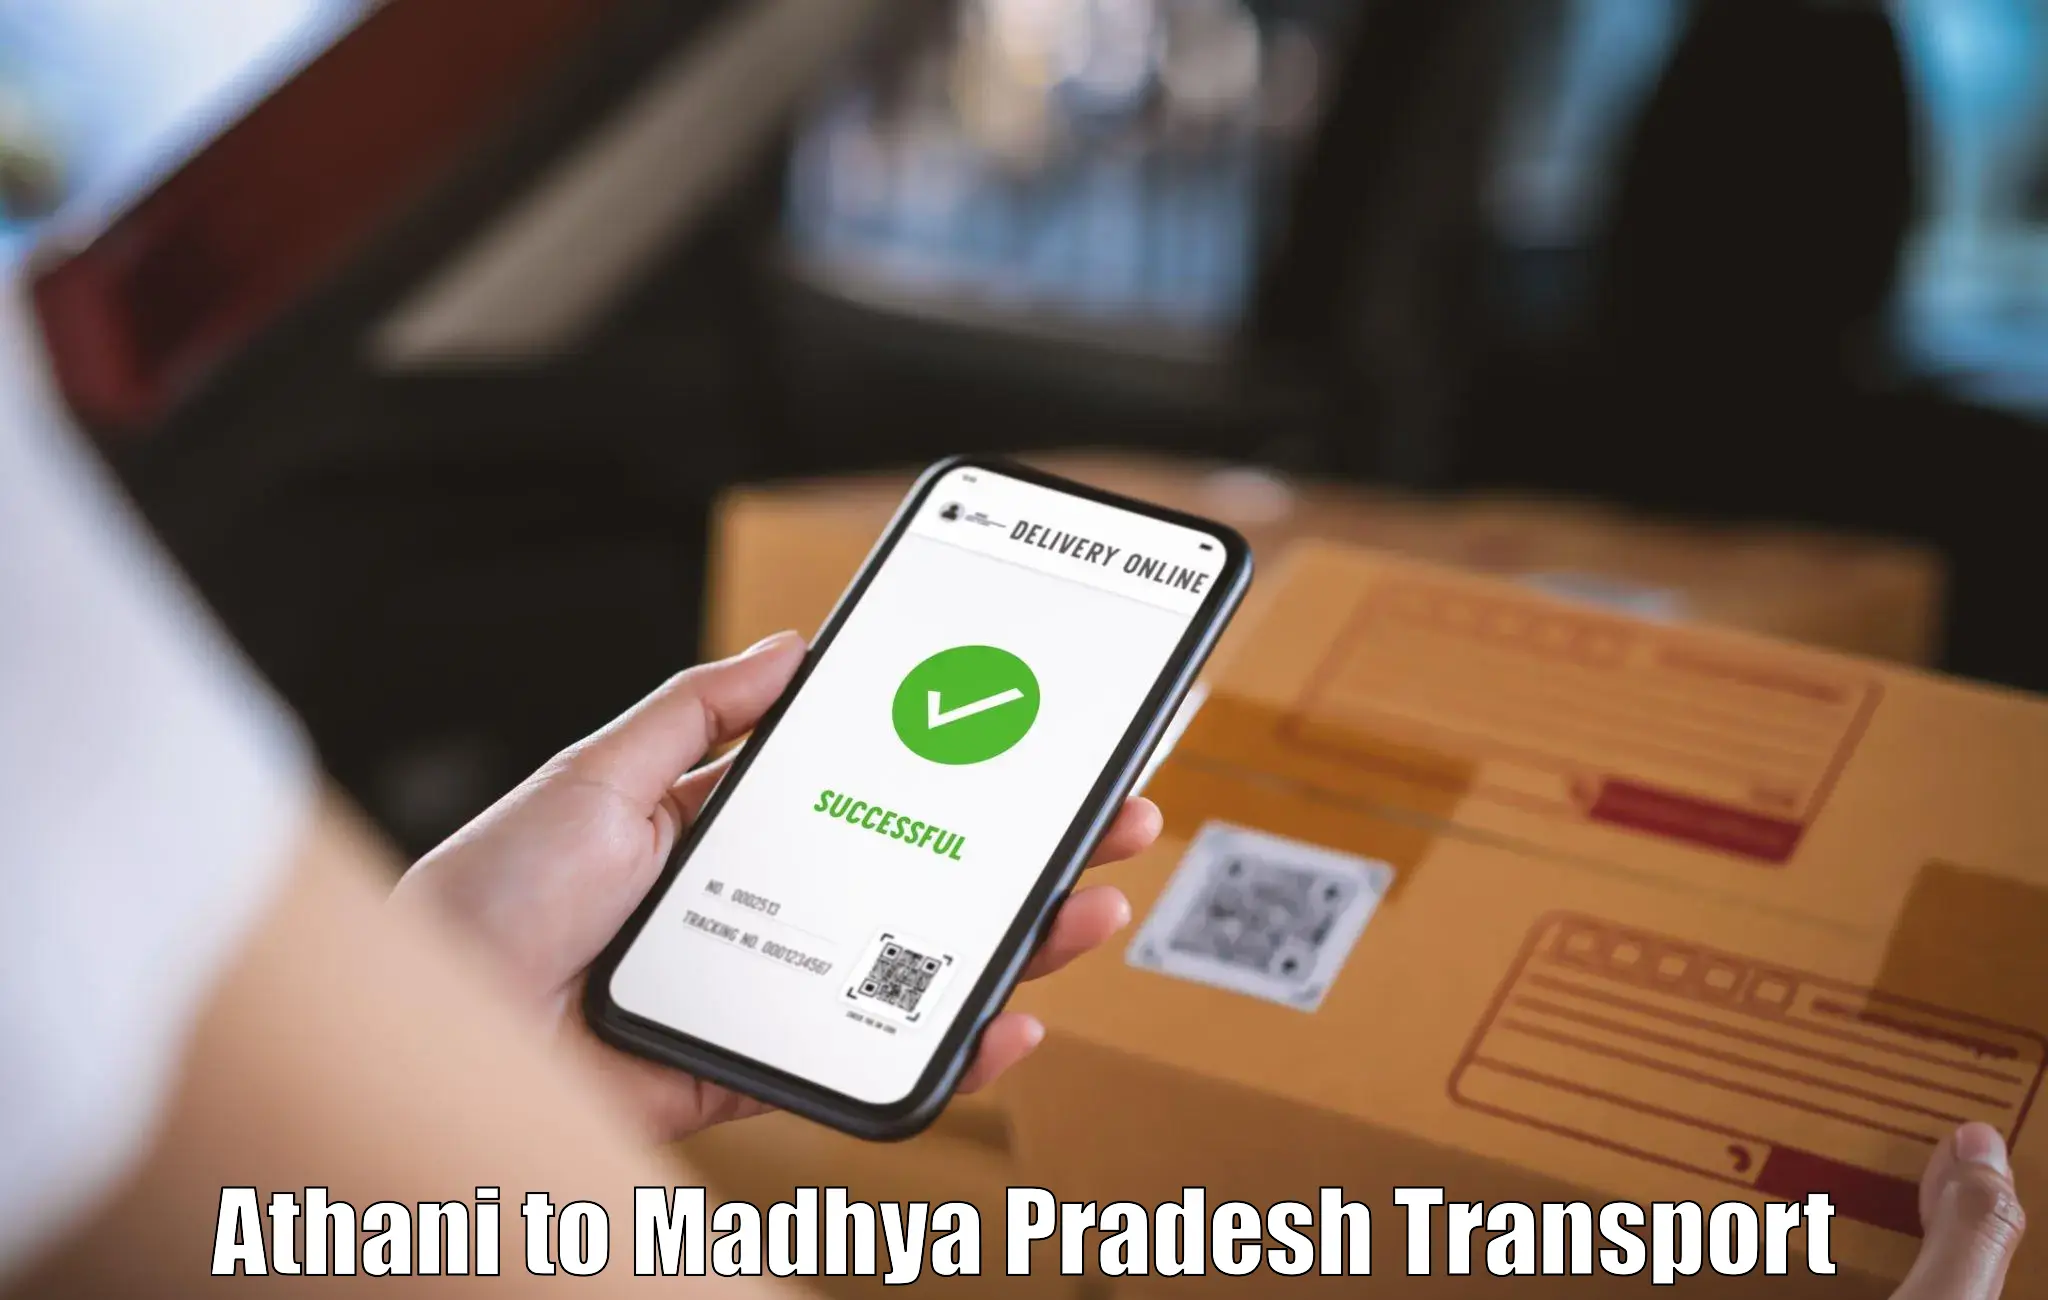 Daily parcel service transport in Athani to Indore